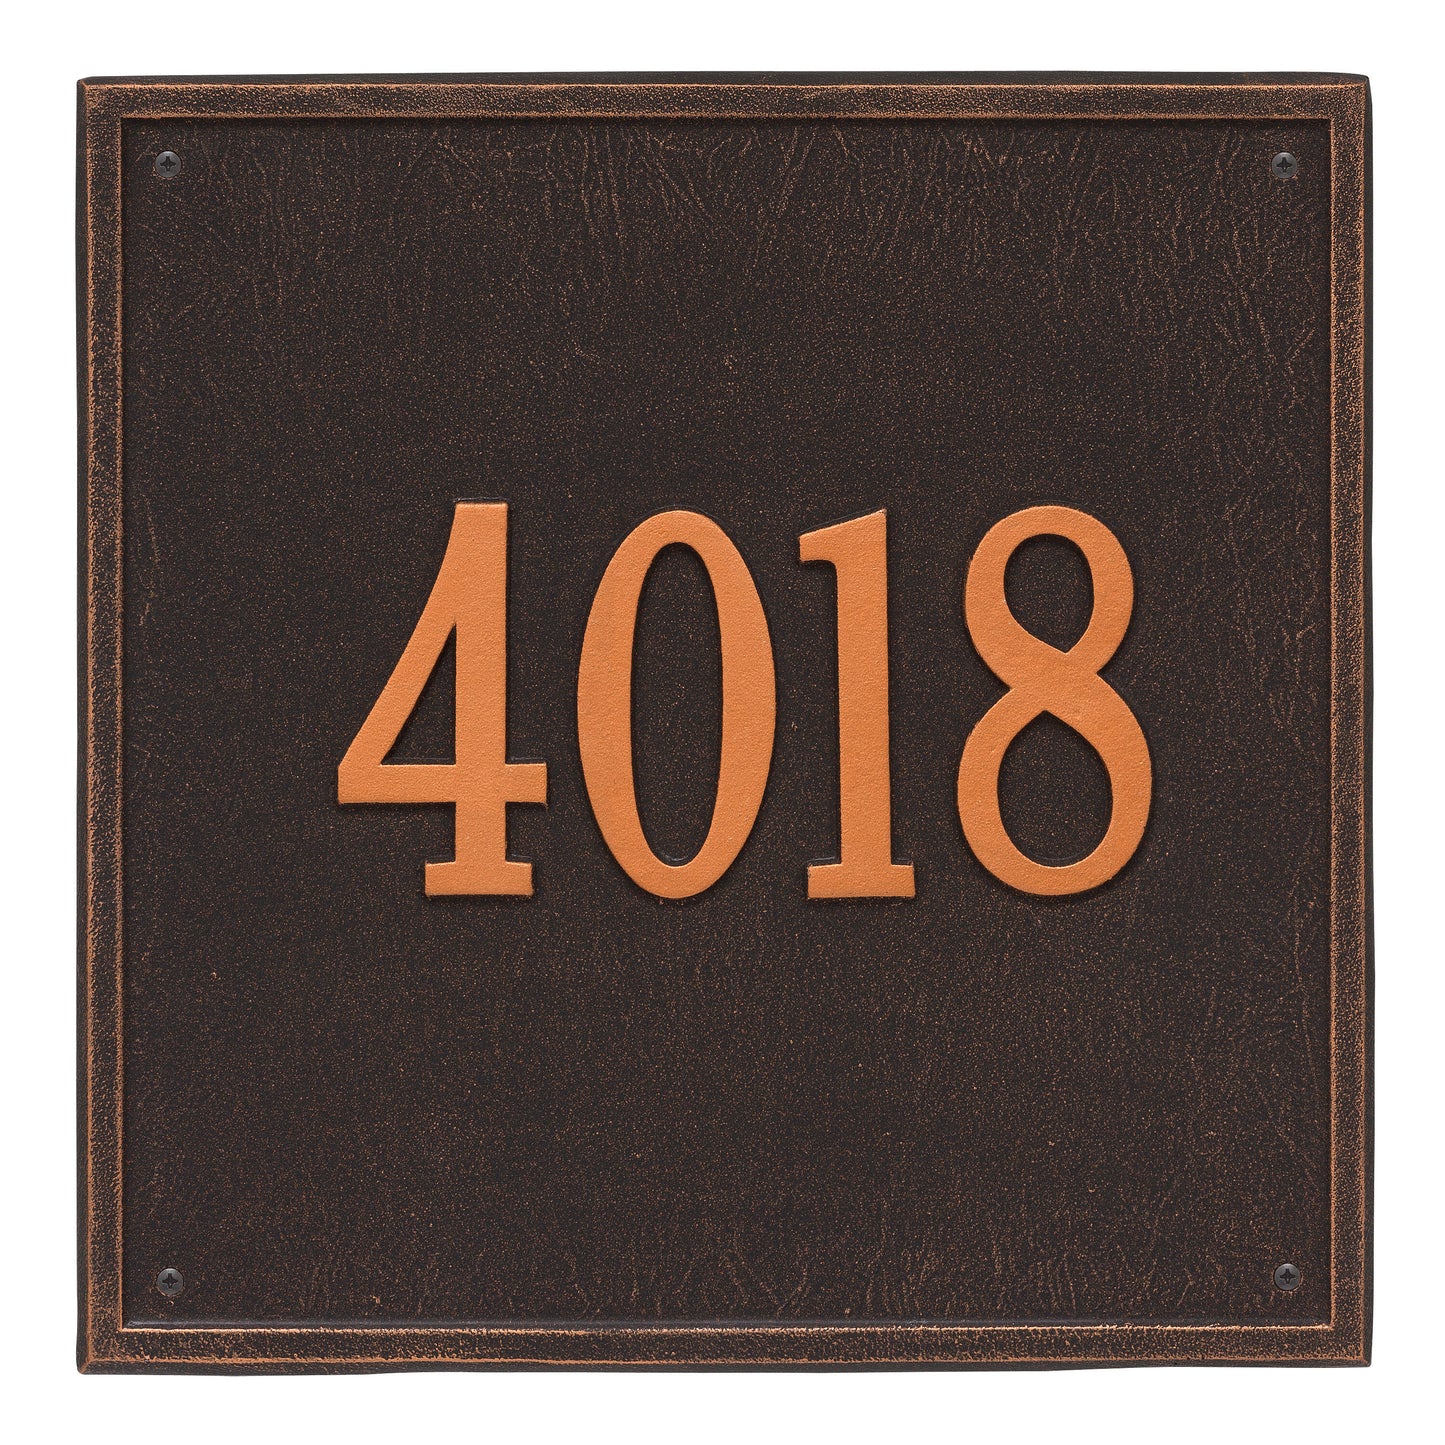 Whitehall Products Personalized Square Estate Wall Plaque One Line Bronze/gold